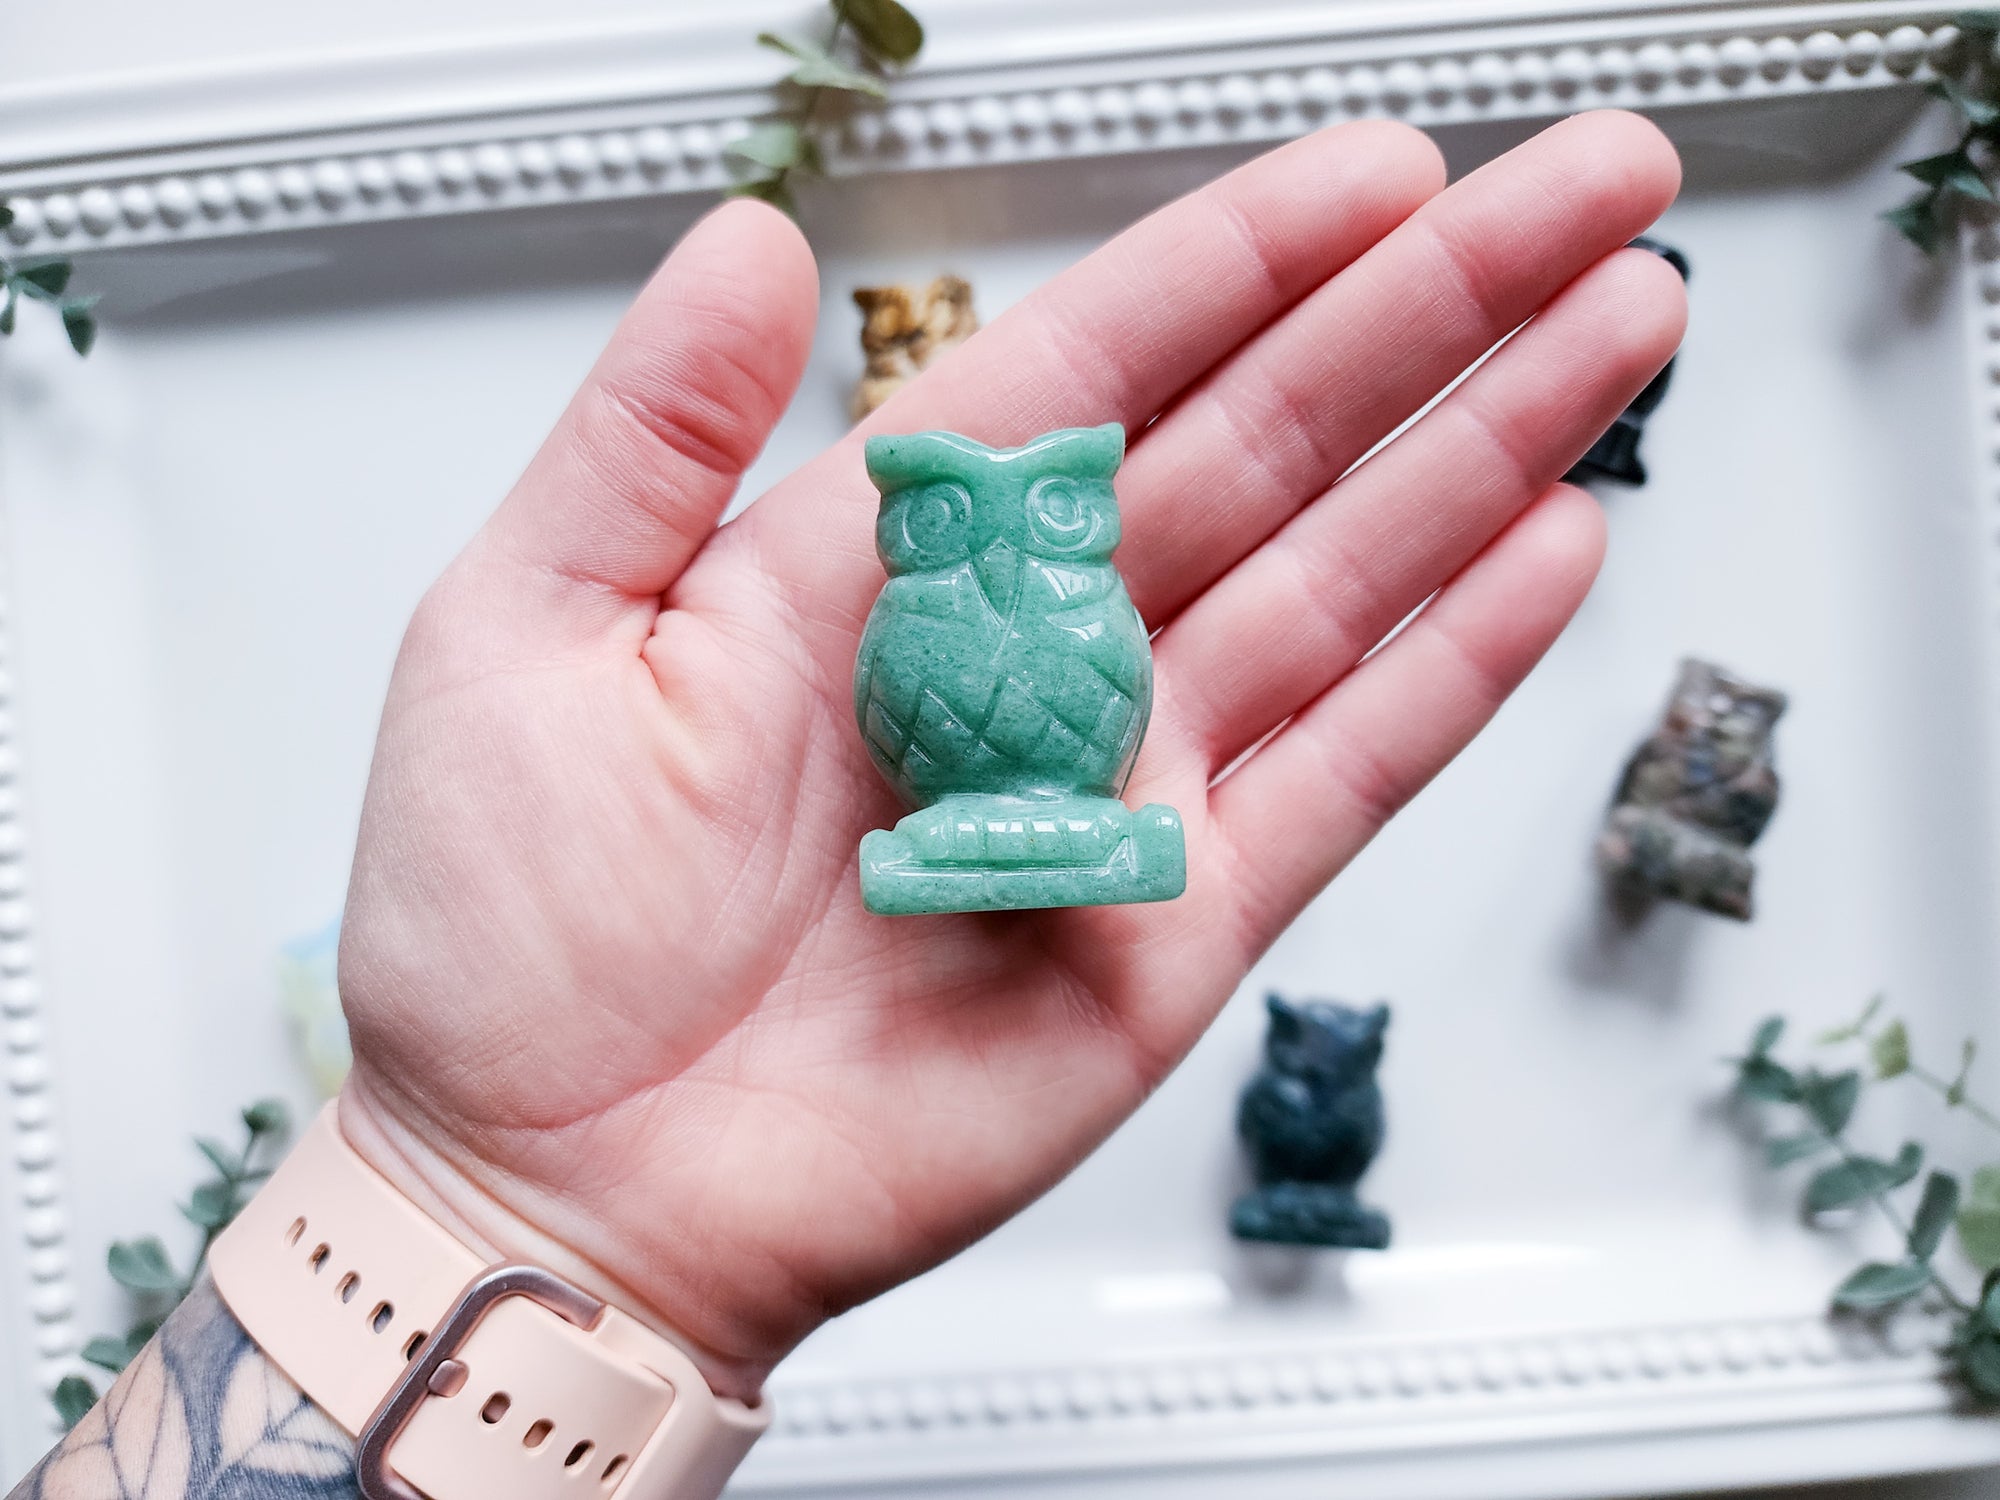 2" Owl Crystal Carving